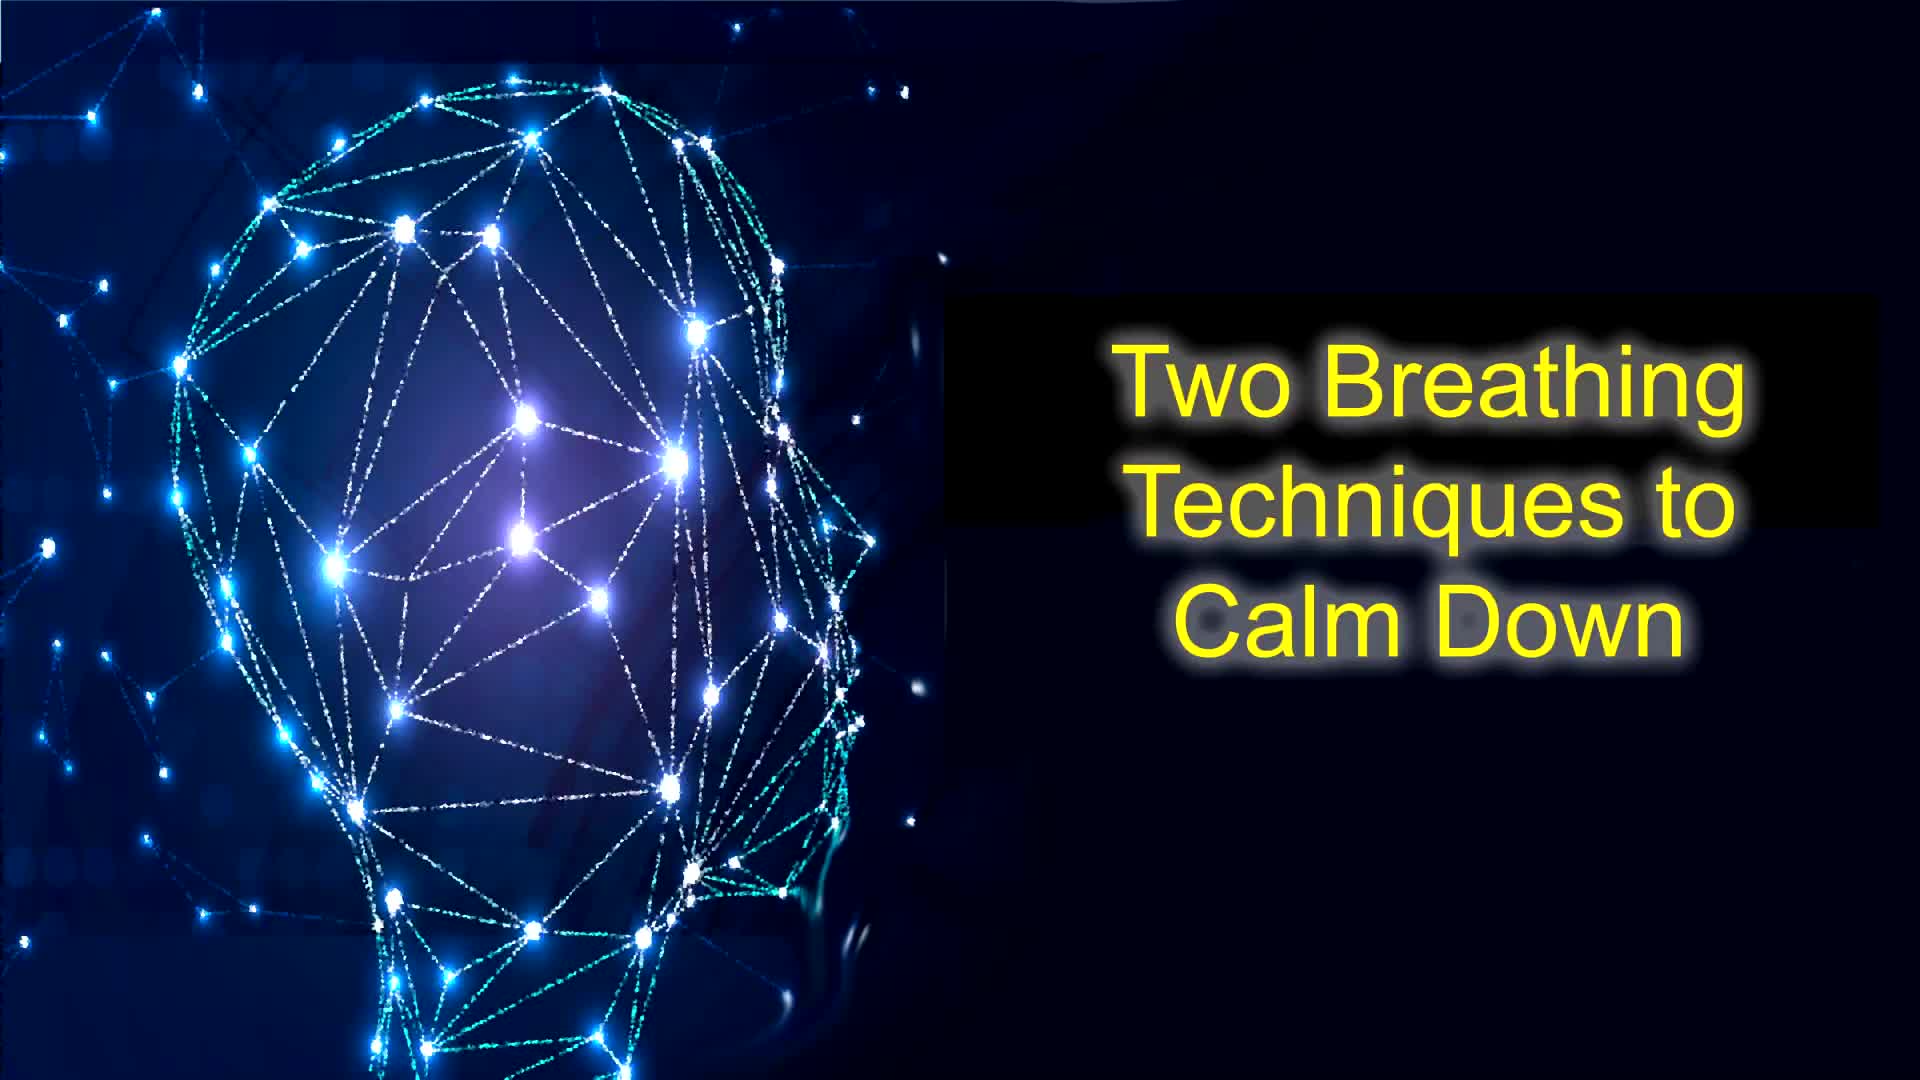 Video: Two Breathing Techniques to Calm Down - 